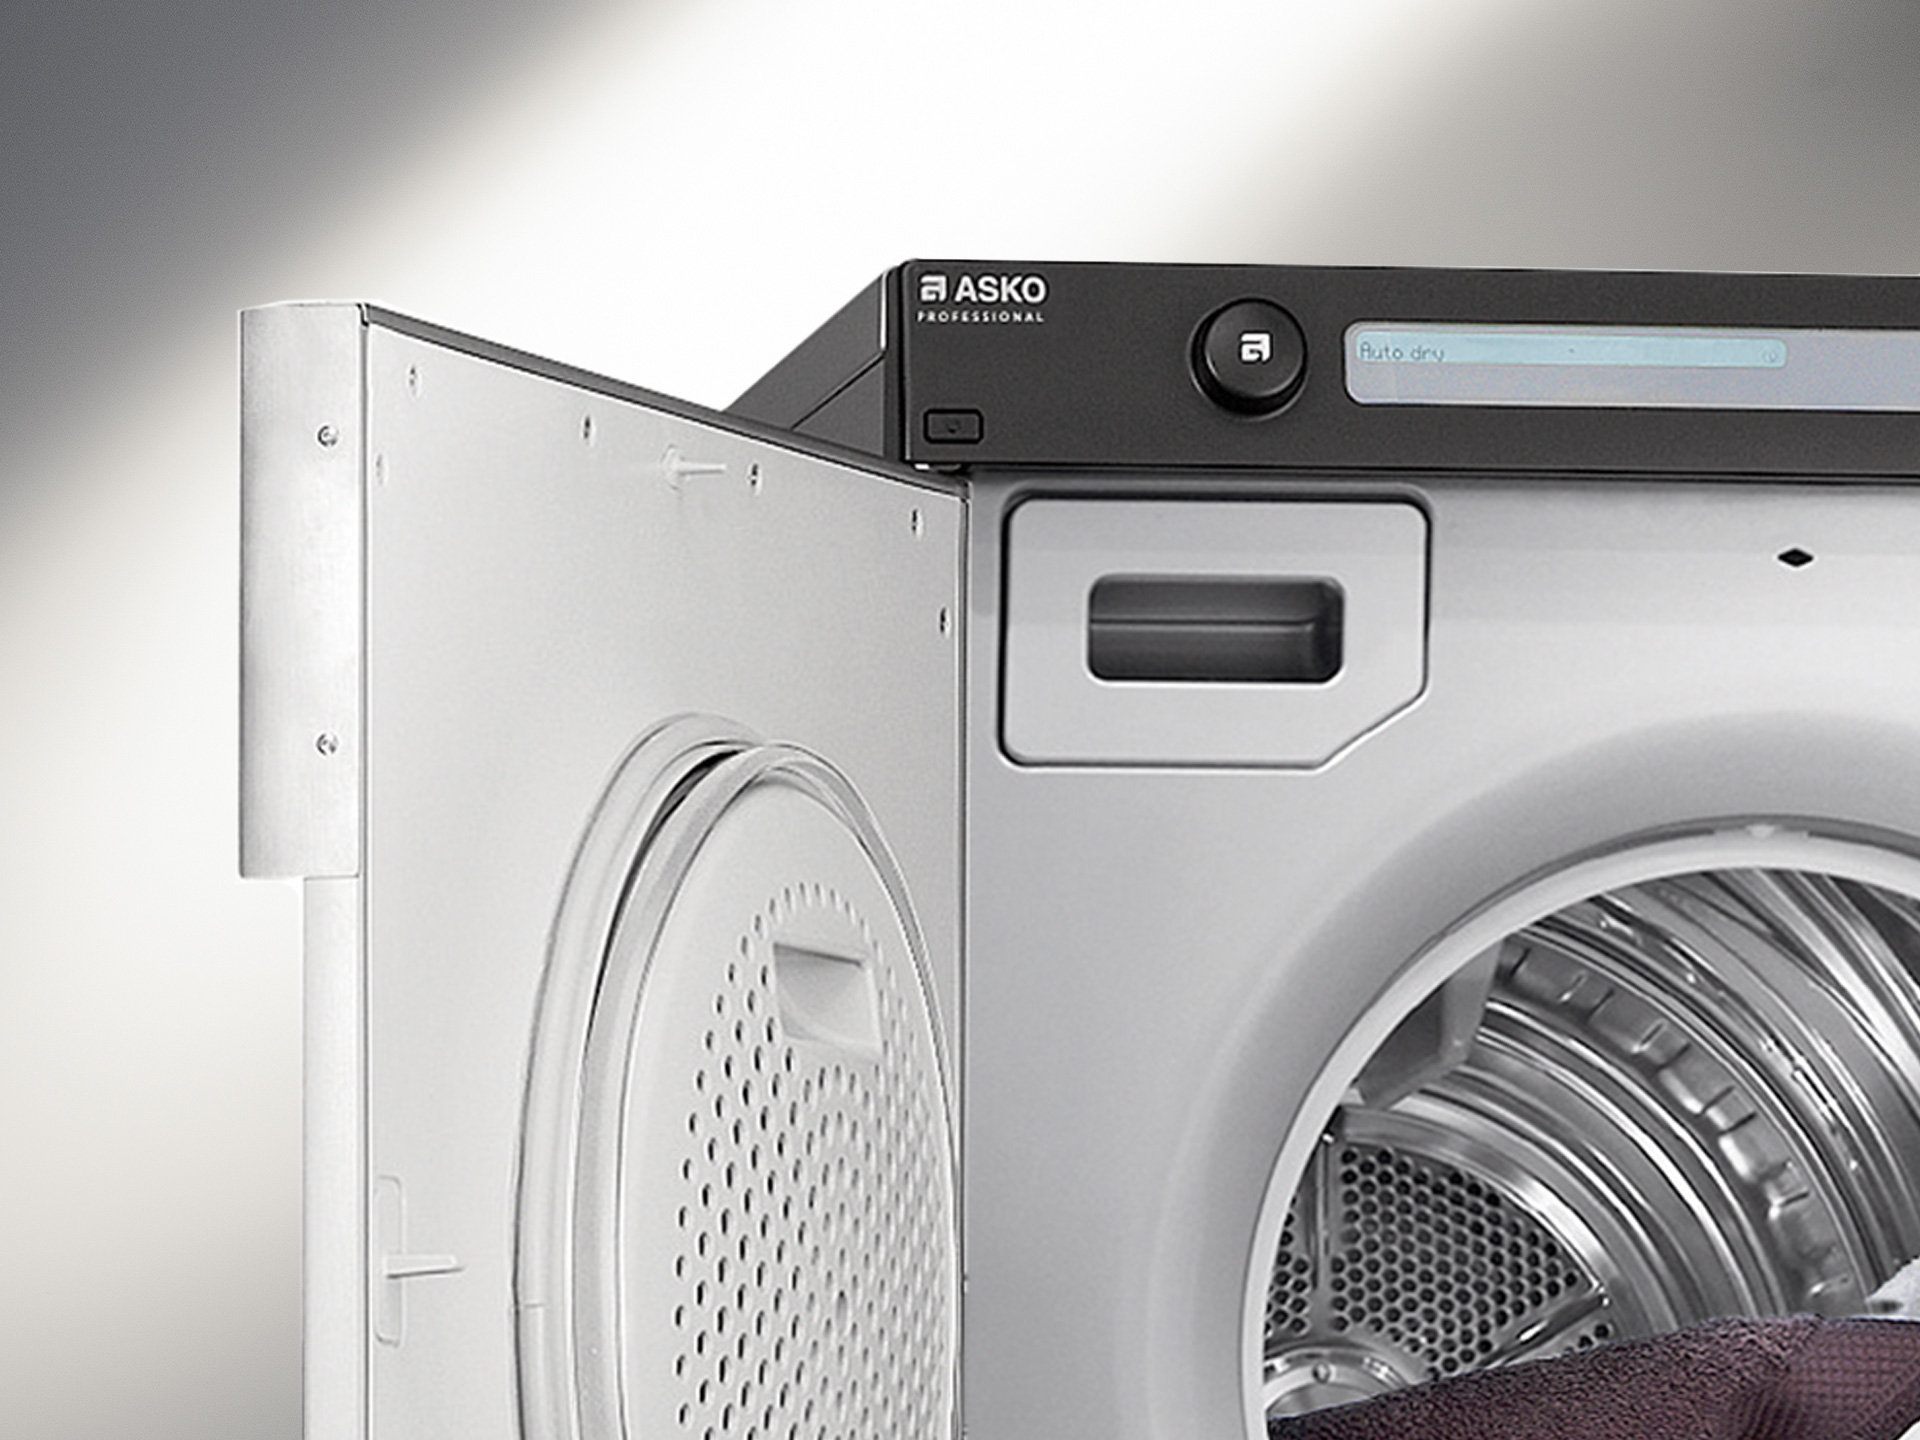 How to Use a Tumble Dryer - Amica International